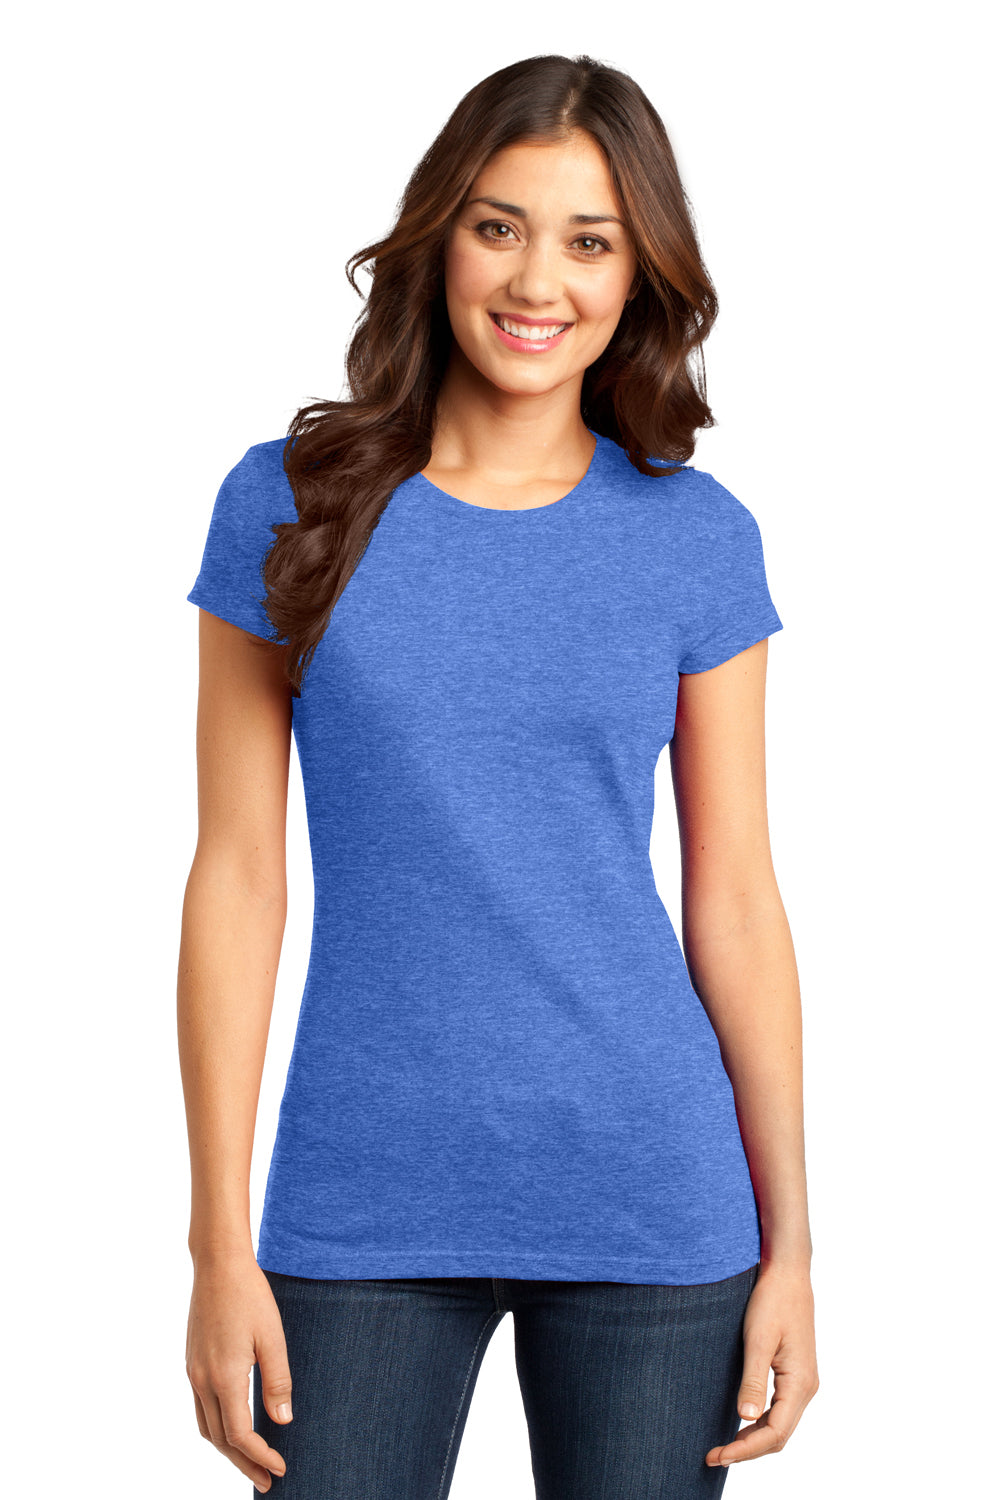 District DT6001 Womens Very Important Short Sleeve Crewneck T-Shirt Heather Royal Blue Front